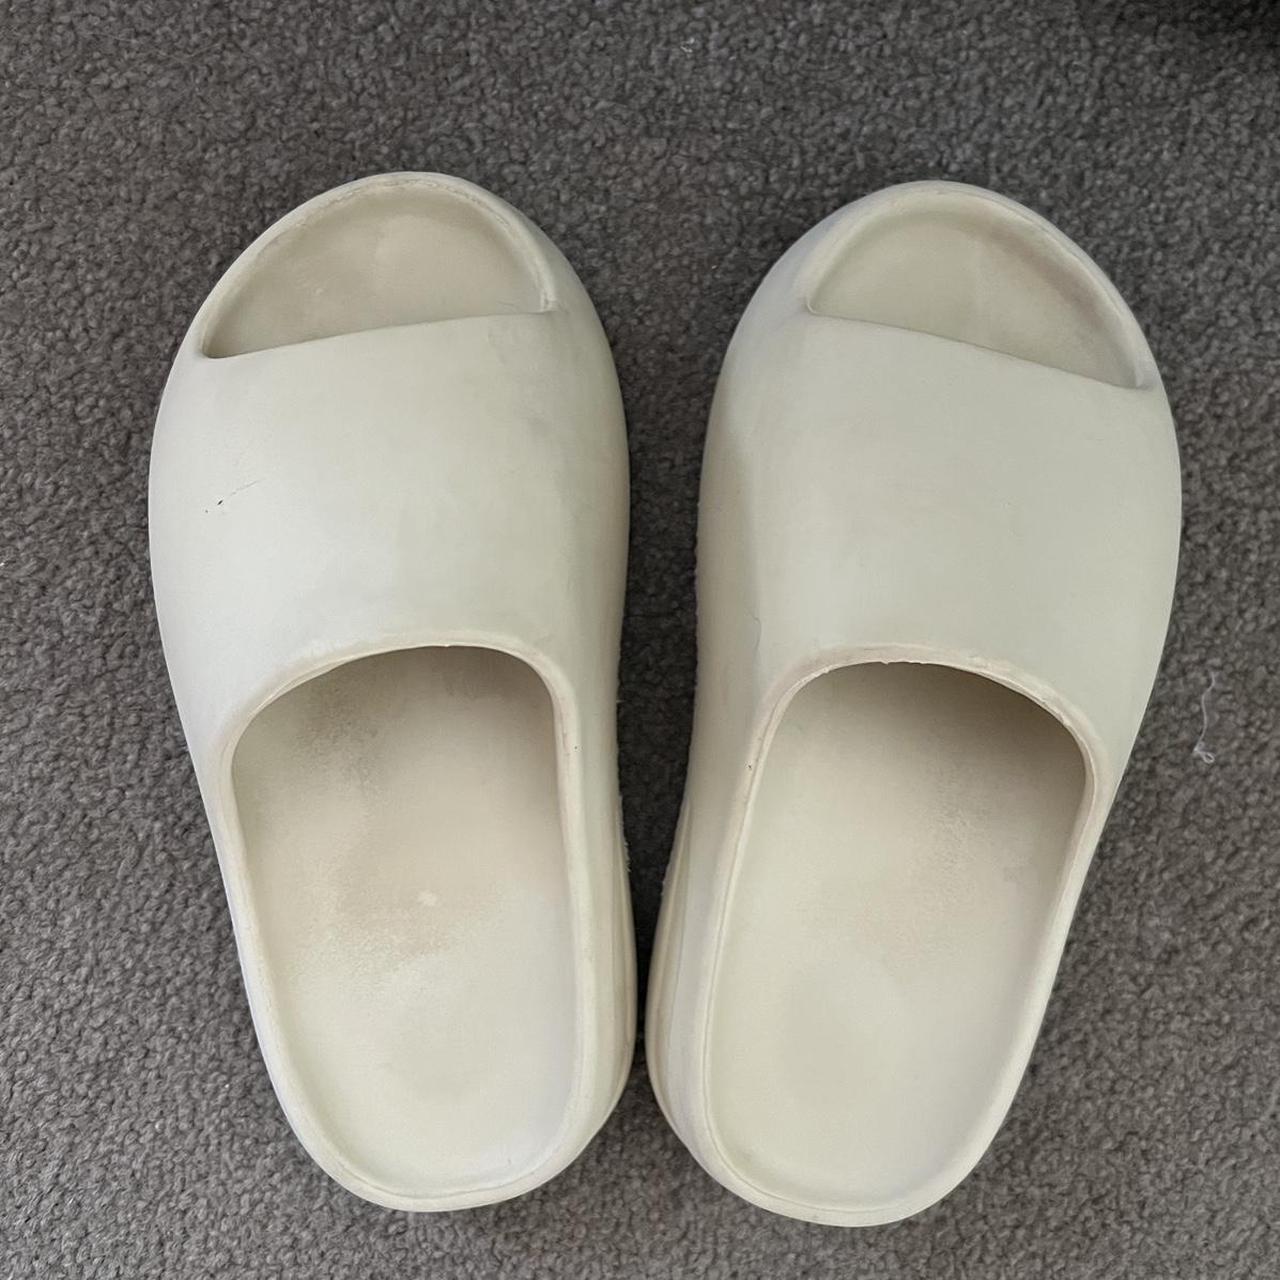 Selling these sick slides ️‍🔥 Can’t remember where I... - Depop